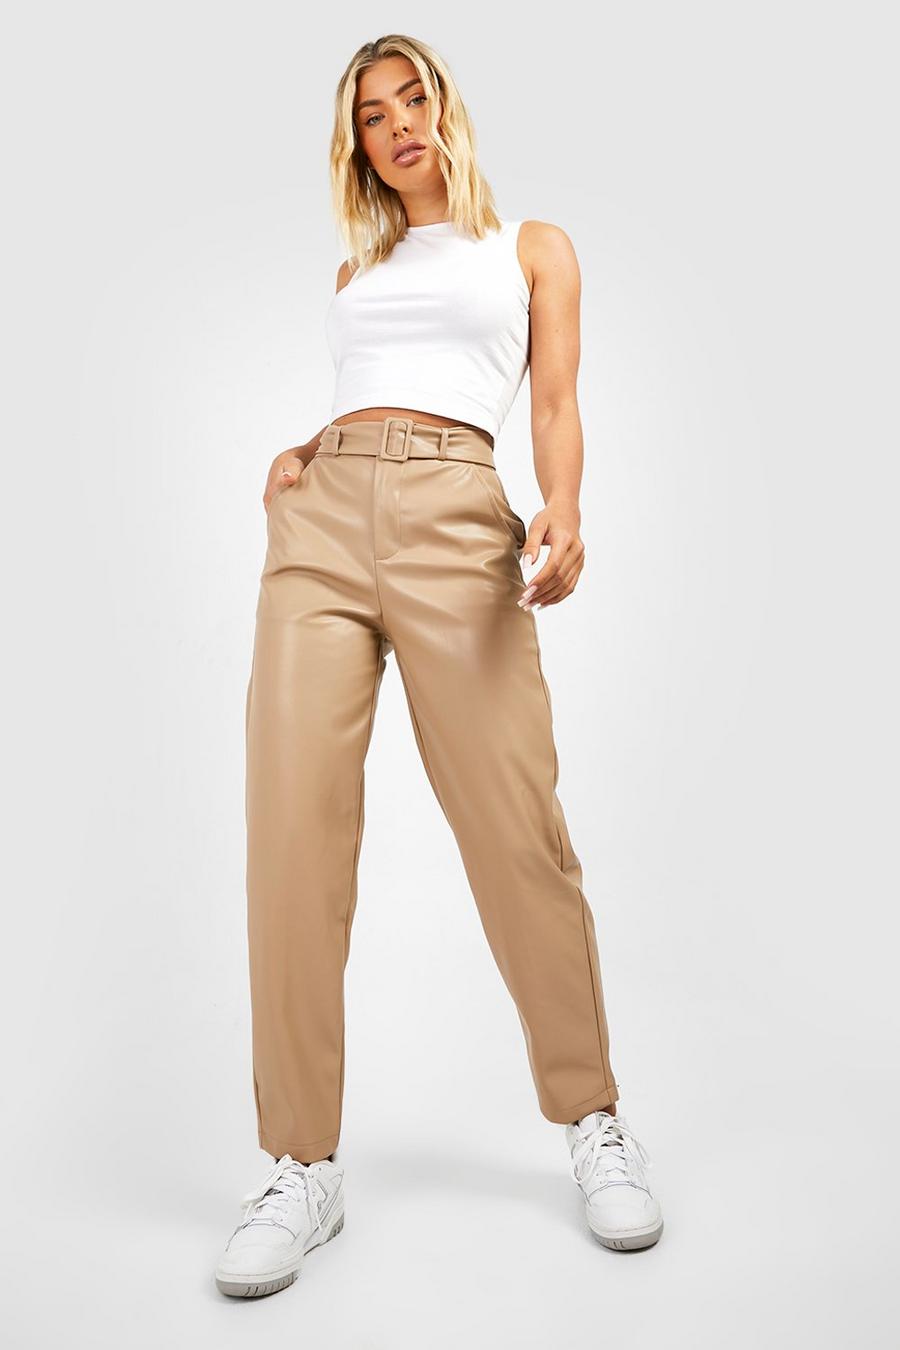 Taupe beige Leather Look High Waisted Belted Tapered Pants